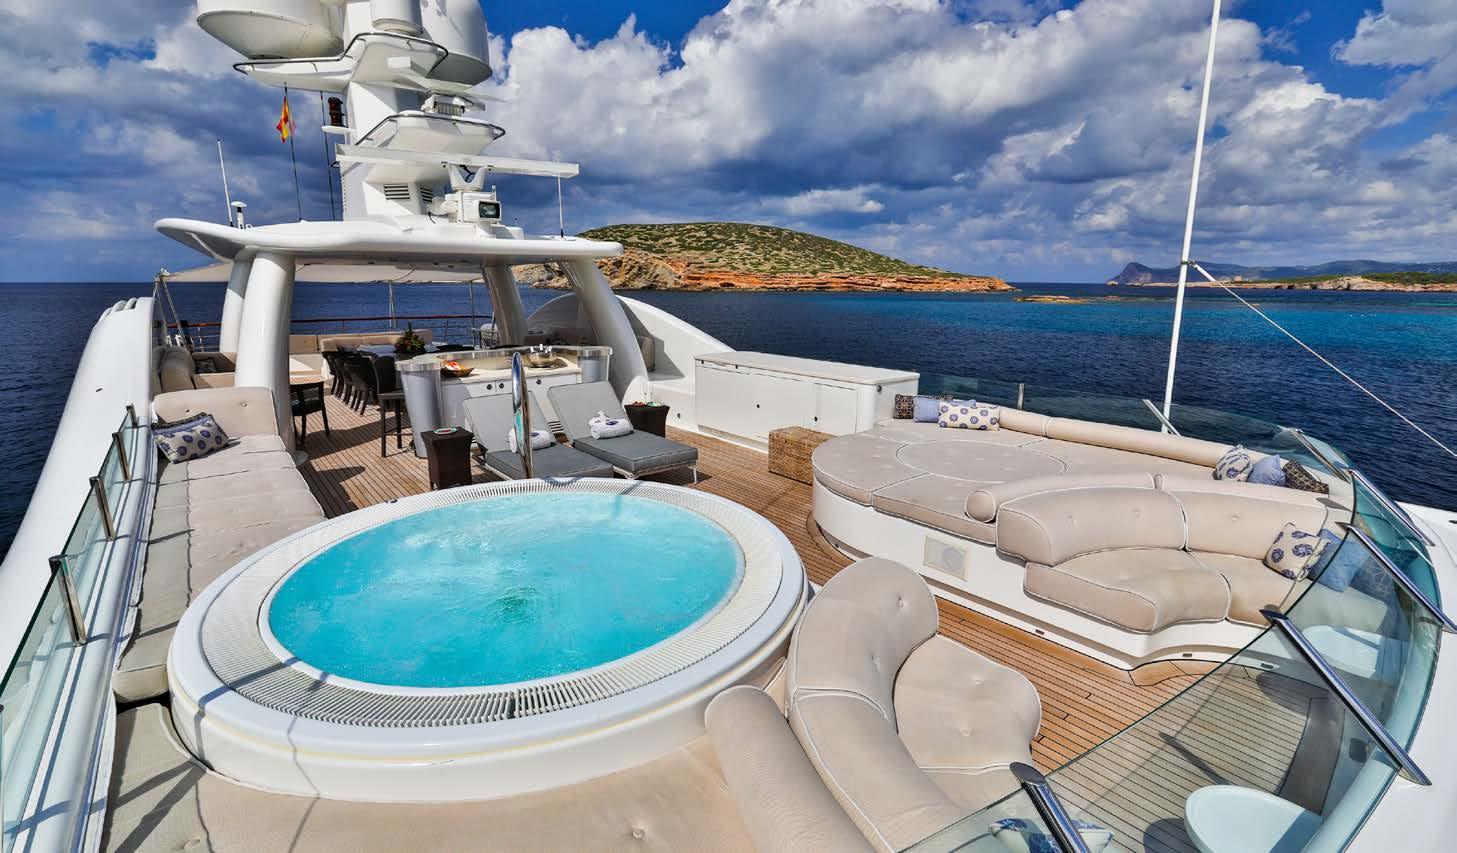 Sun deck with a Jacuzzi spa